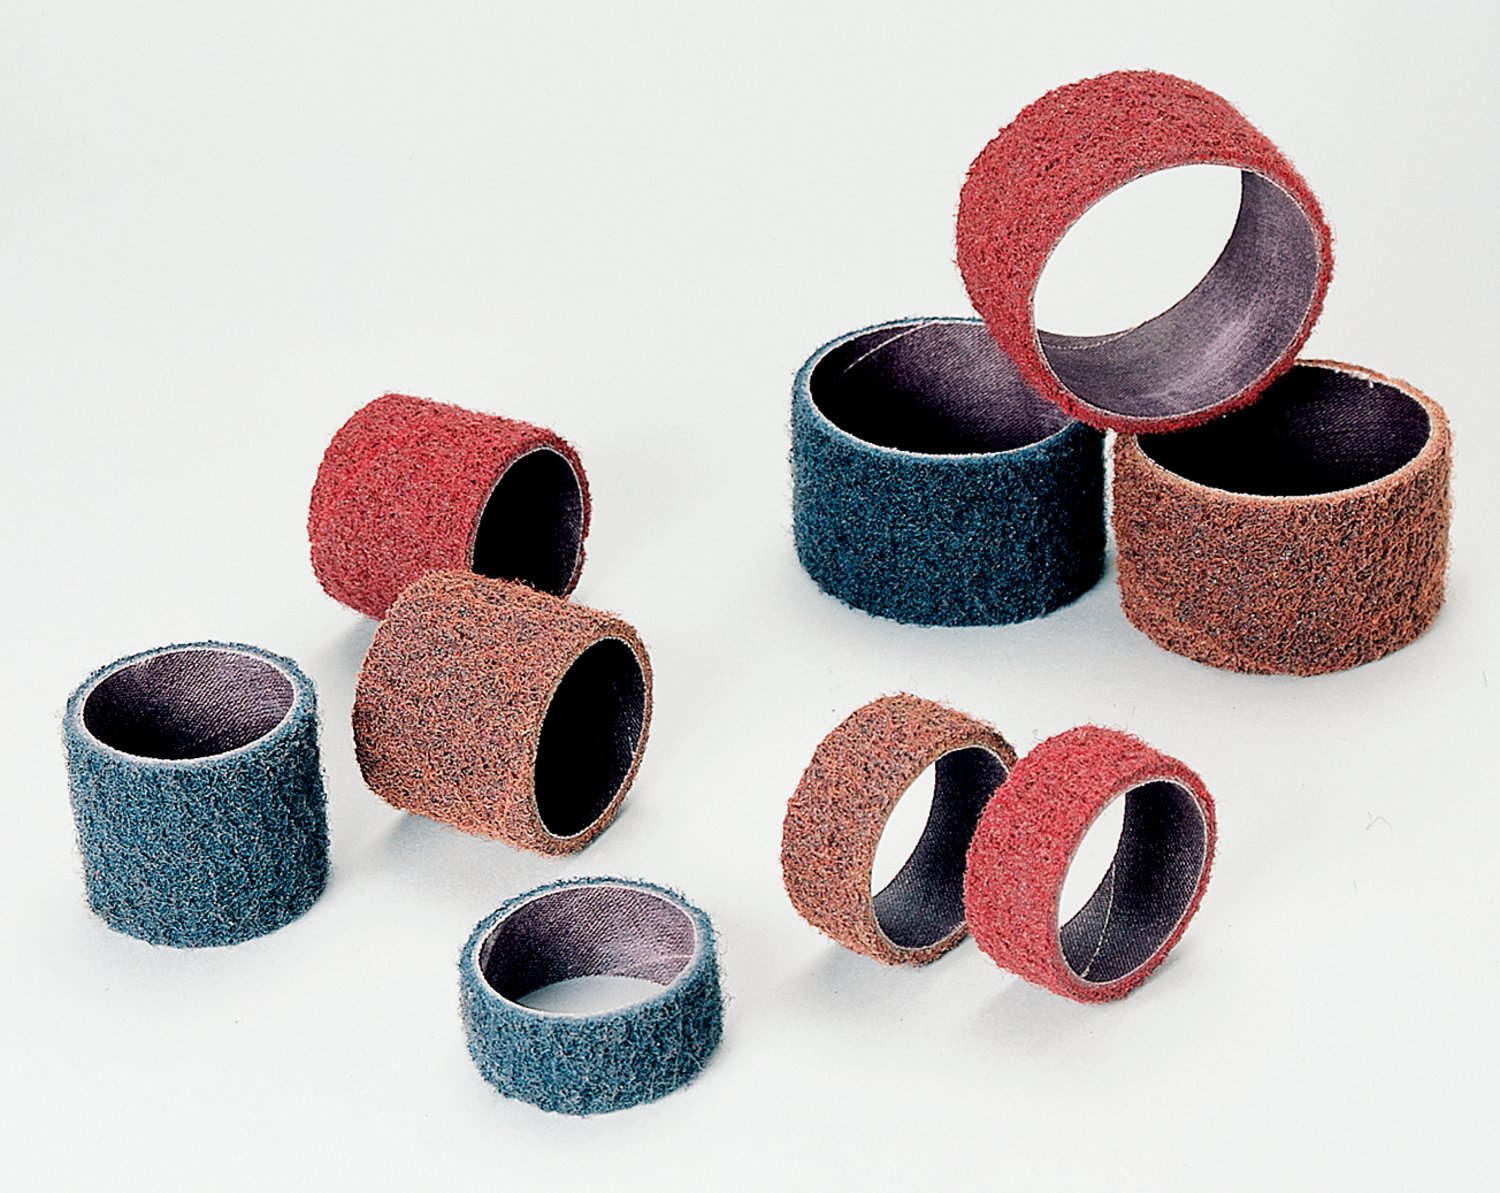 7010368749 - Standard Abrasives Surface Conditioning Band 727094, 1-1/2 in x 1-1/2
in VFN, 10/Carton, 100 ea/Case